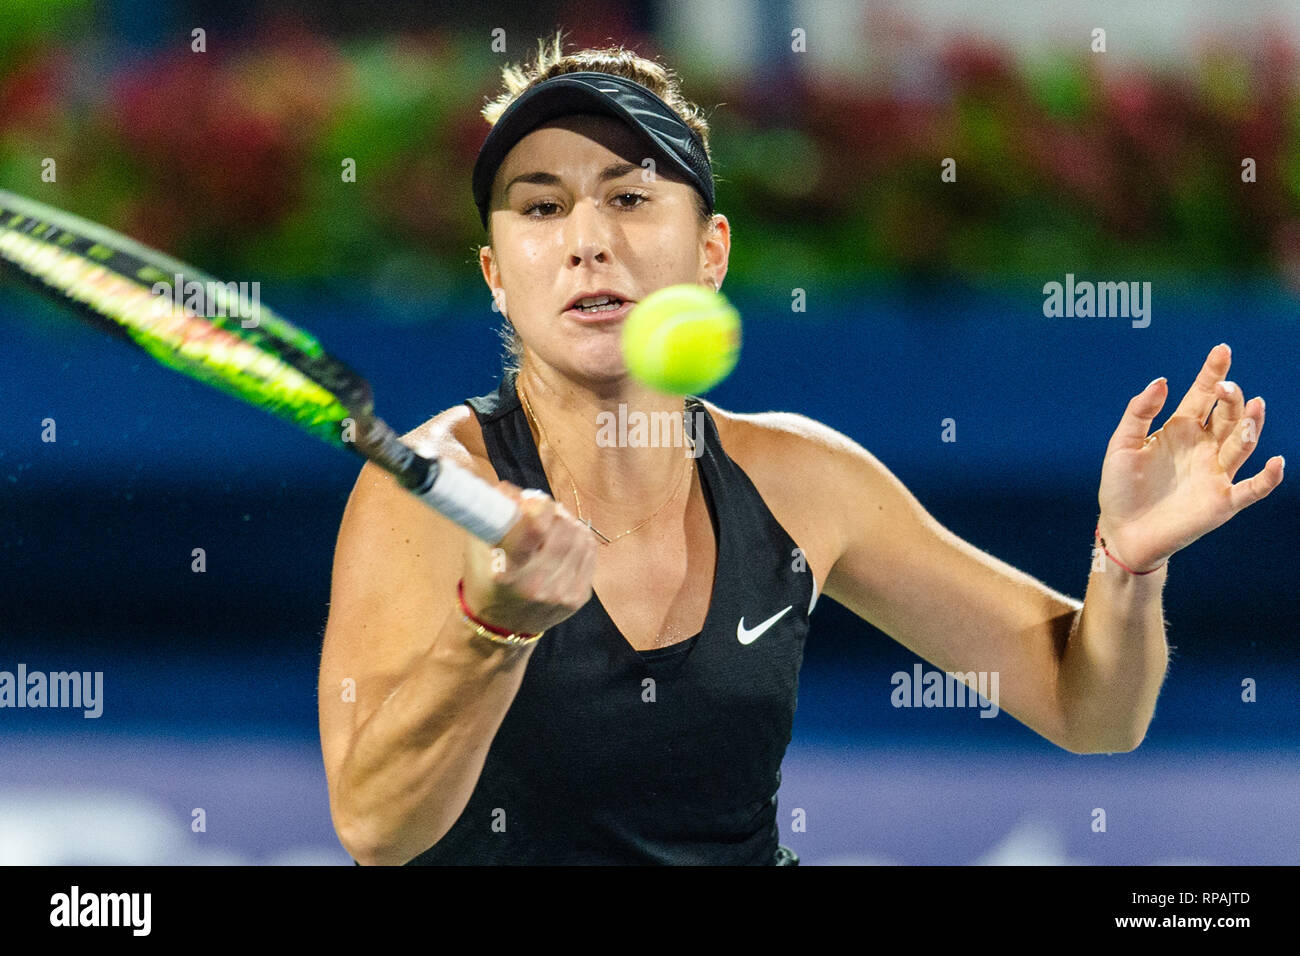 Dubai, Uinted Arab Emirates. 21st Feb 2019. Belinda Bencic of Switzerland  in action in the quarter final match against Simona Halep of Romania during  the Dubai Duty Free Tennis Championship at the